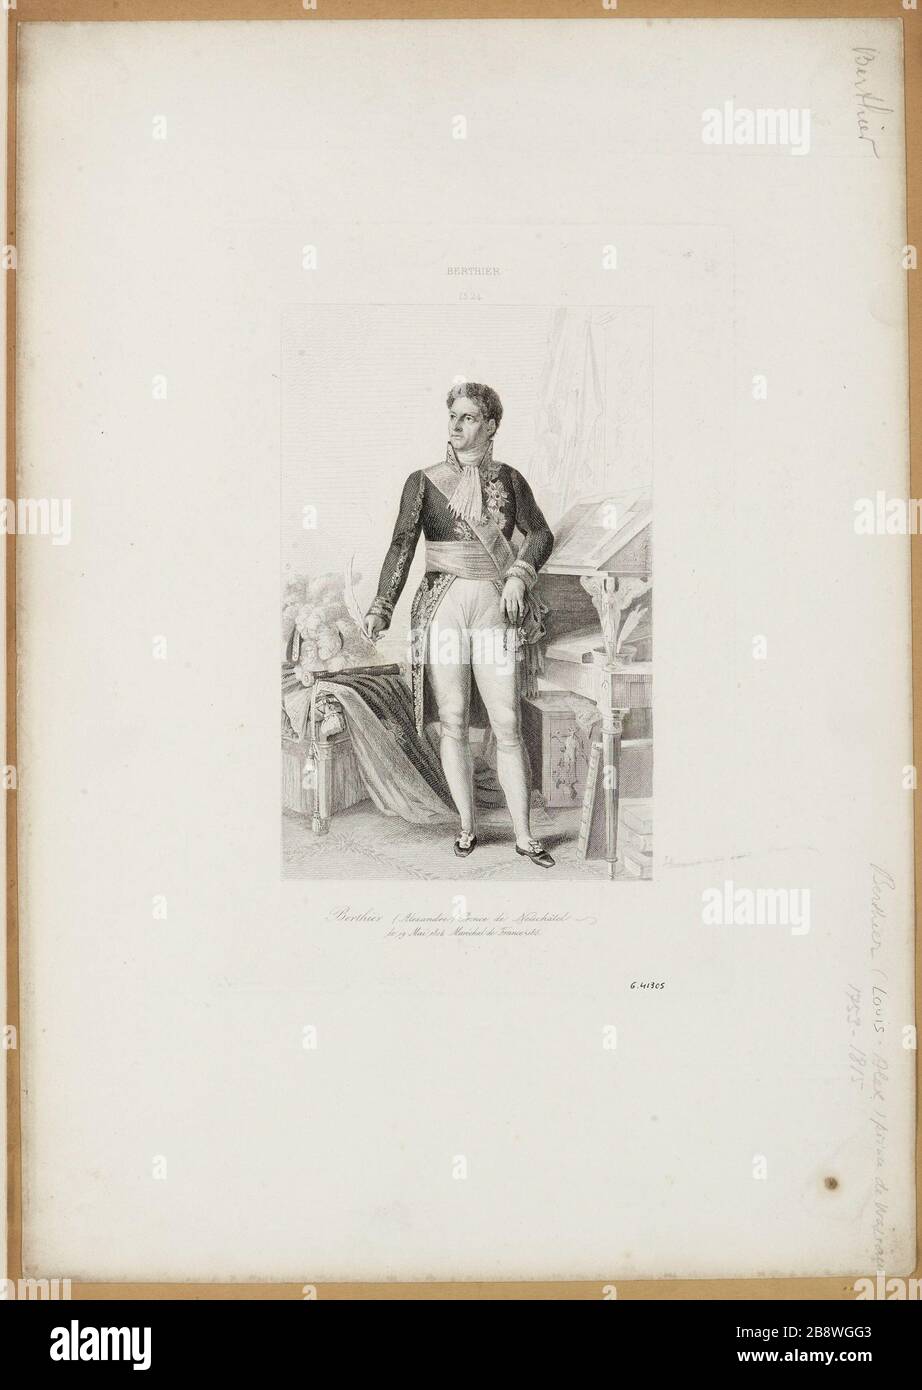 Berthier (Alexandre) Prince of Neuchâtel / May 19, 1804 Marshal of France + 1815. Stock Photo